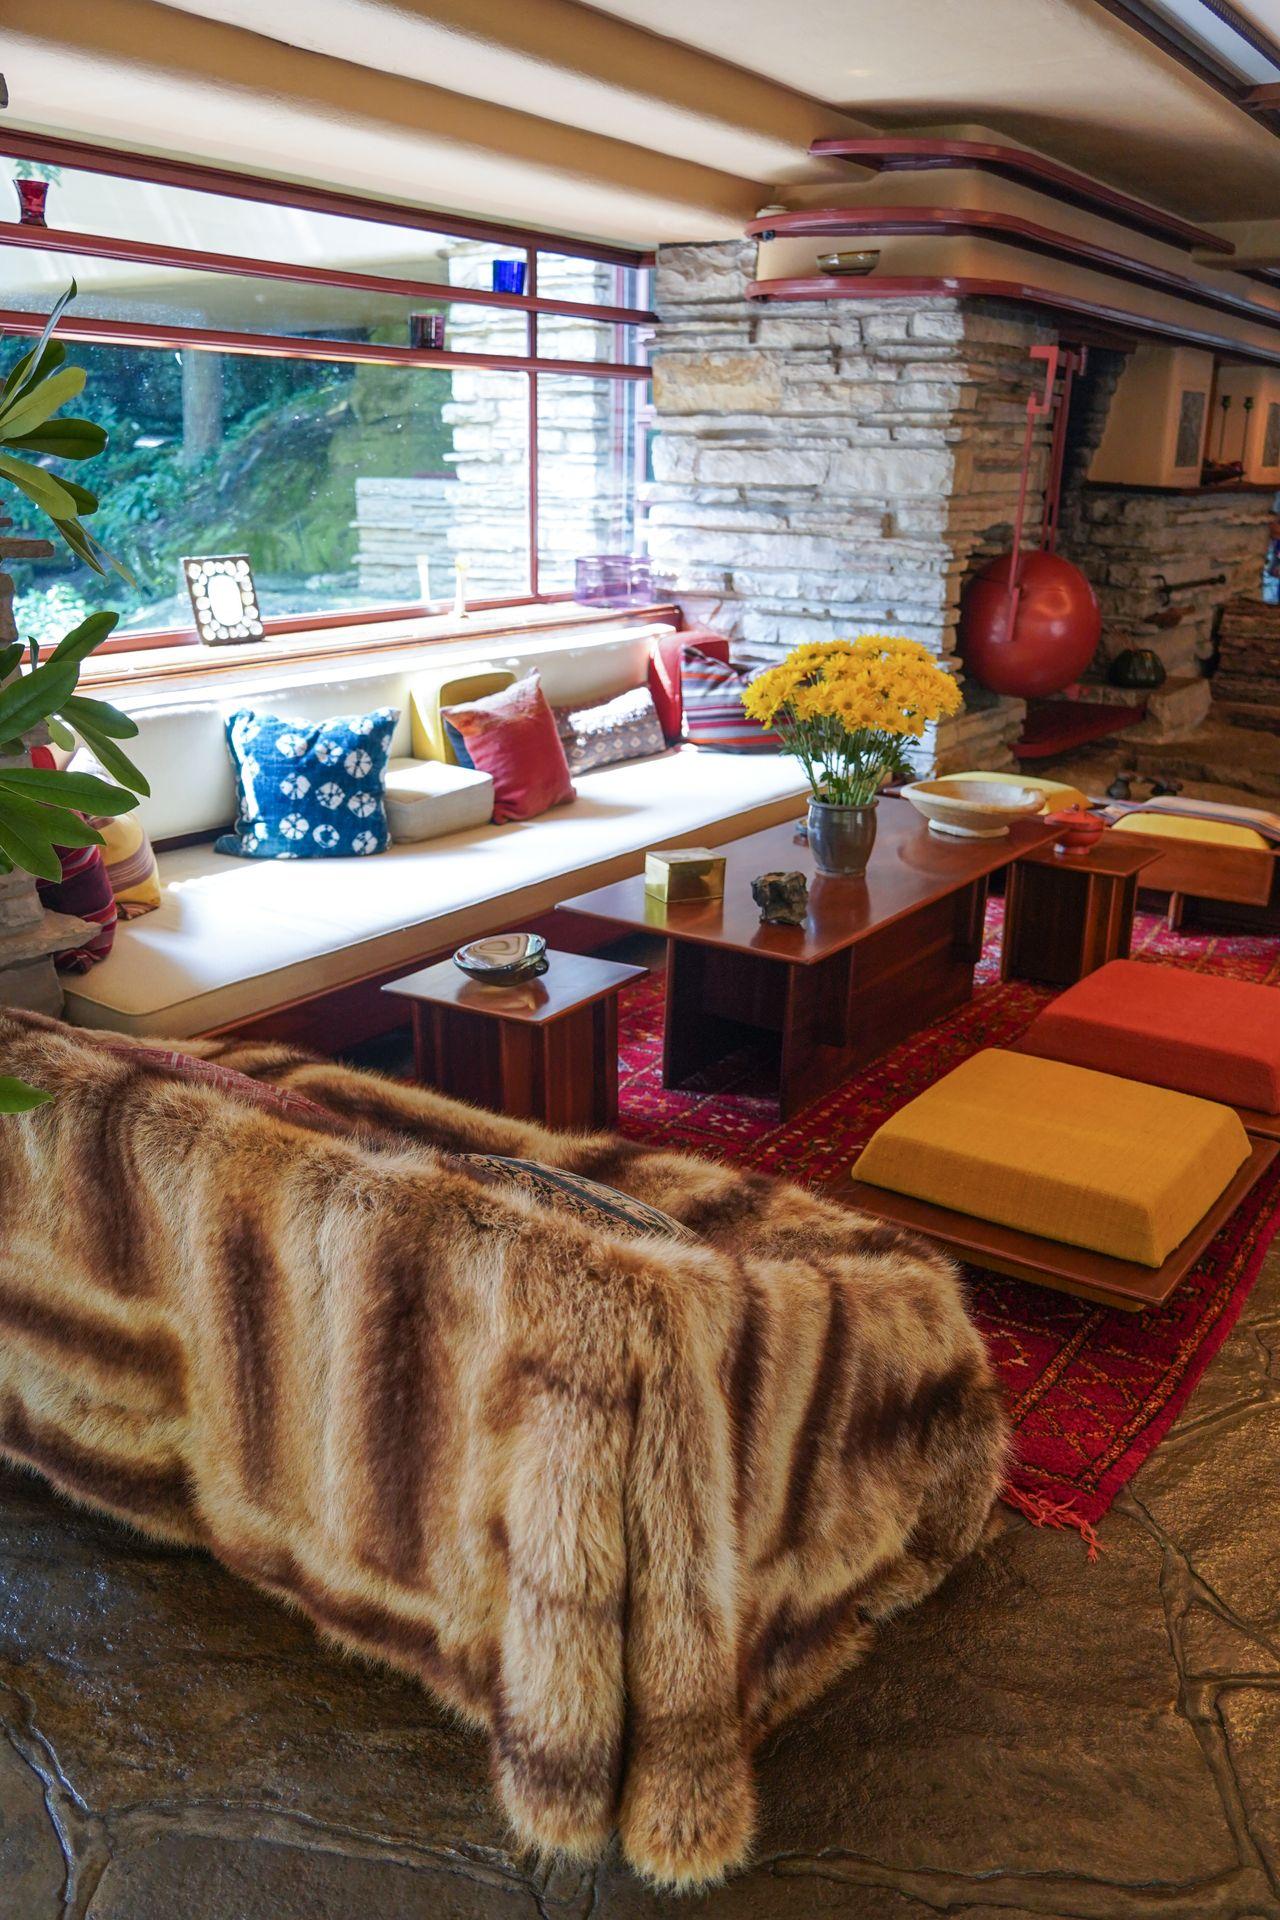 The main living space in Fallingwater. There is a couch against the wall, a fur blanket covering a smaller couch, a red rug and a couple of small tables. There is also a vace of yellow flowers and some colorful throw pillows on the couch.